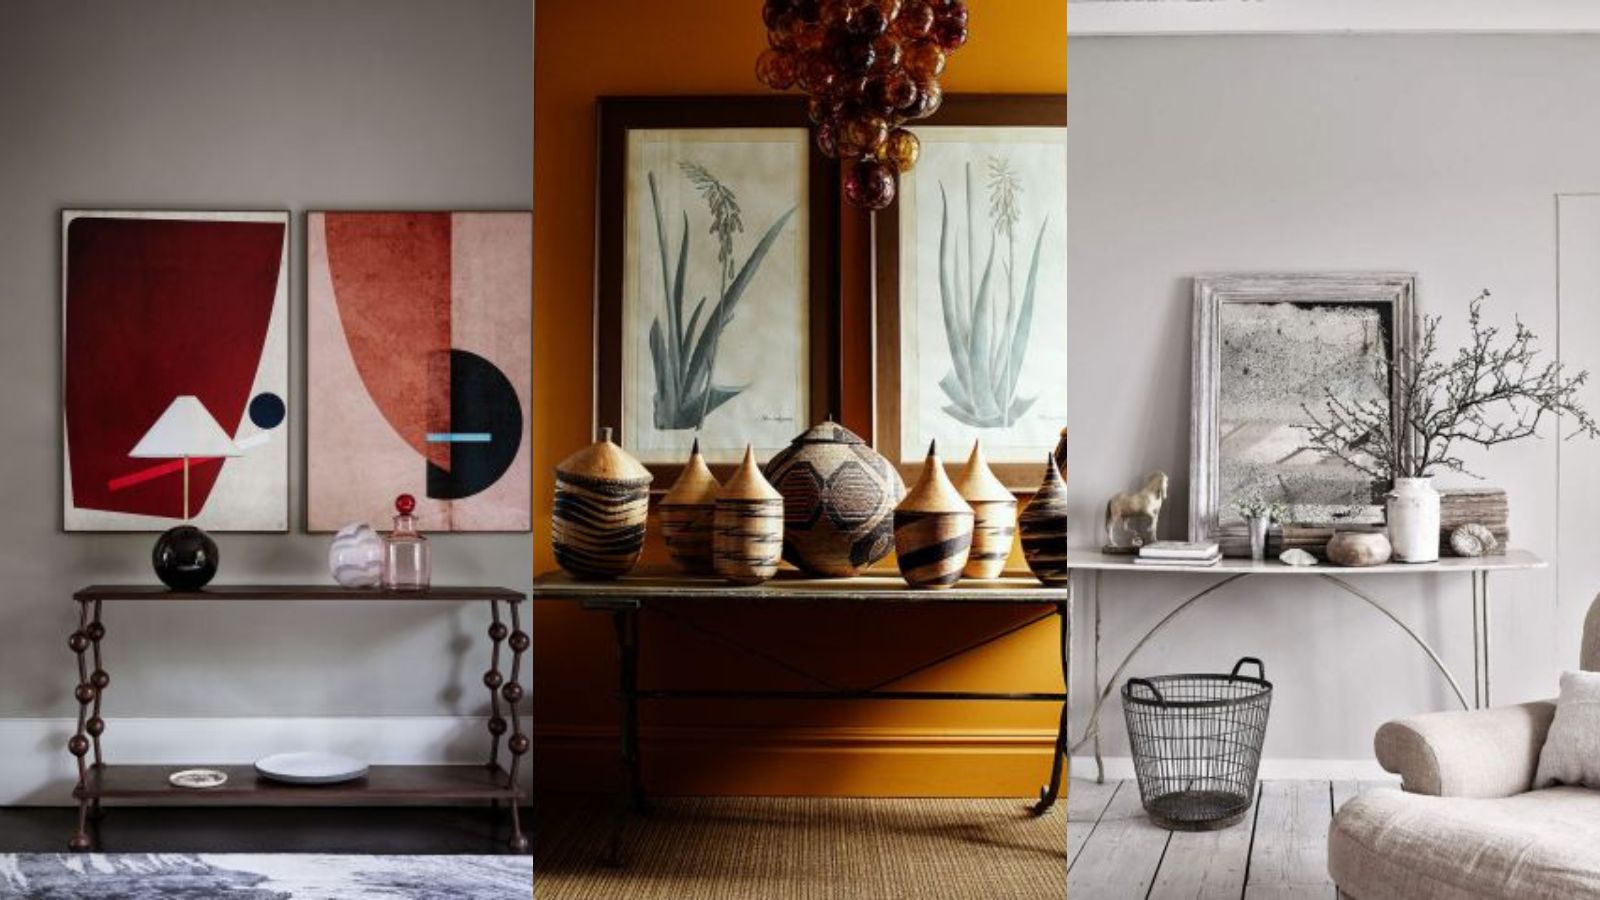 Big Impact Decor: 10 Entryway Ideas for Medium and Small Spaces 